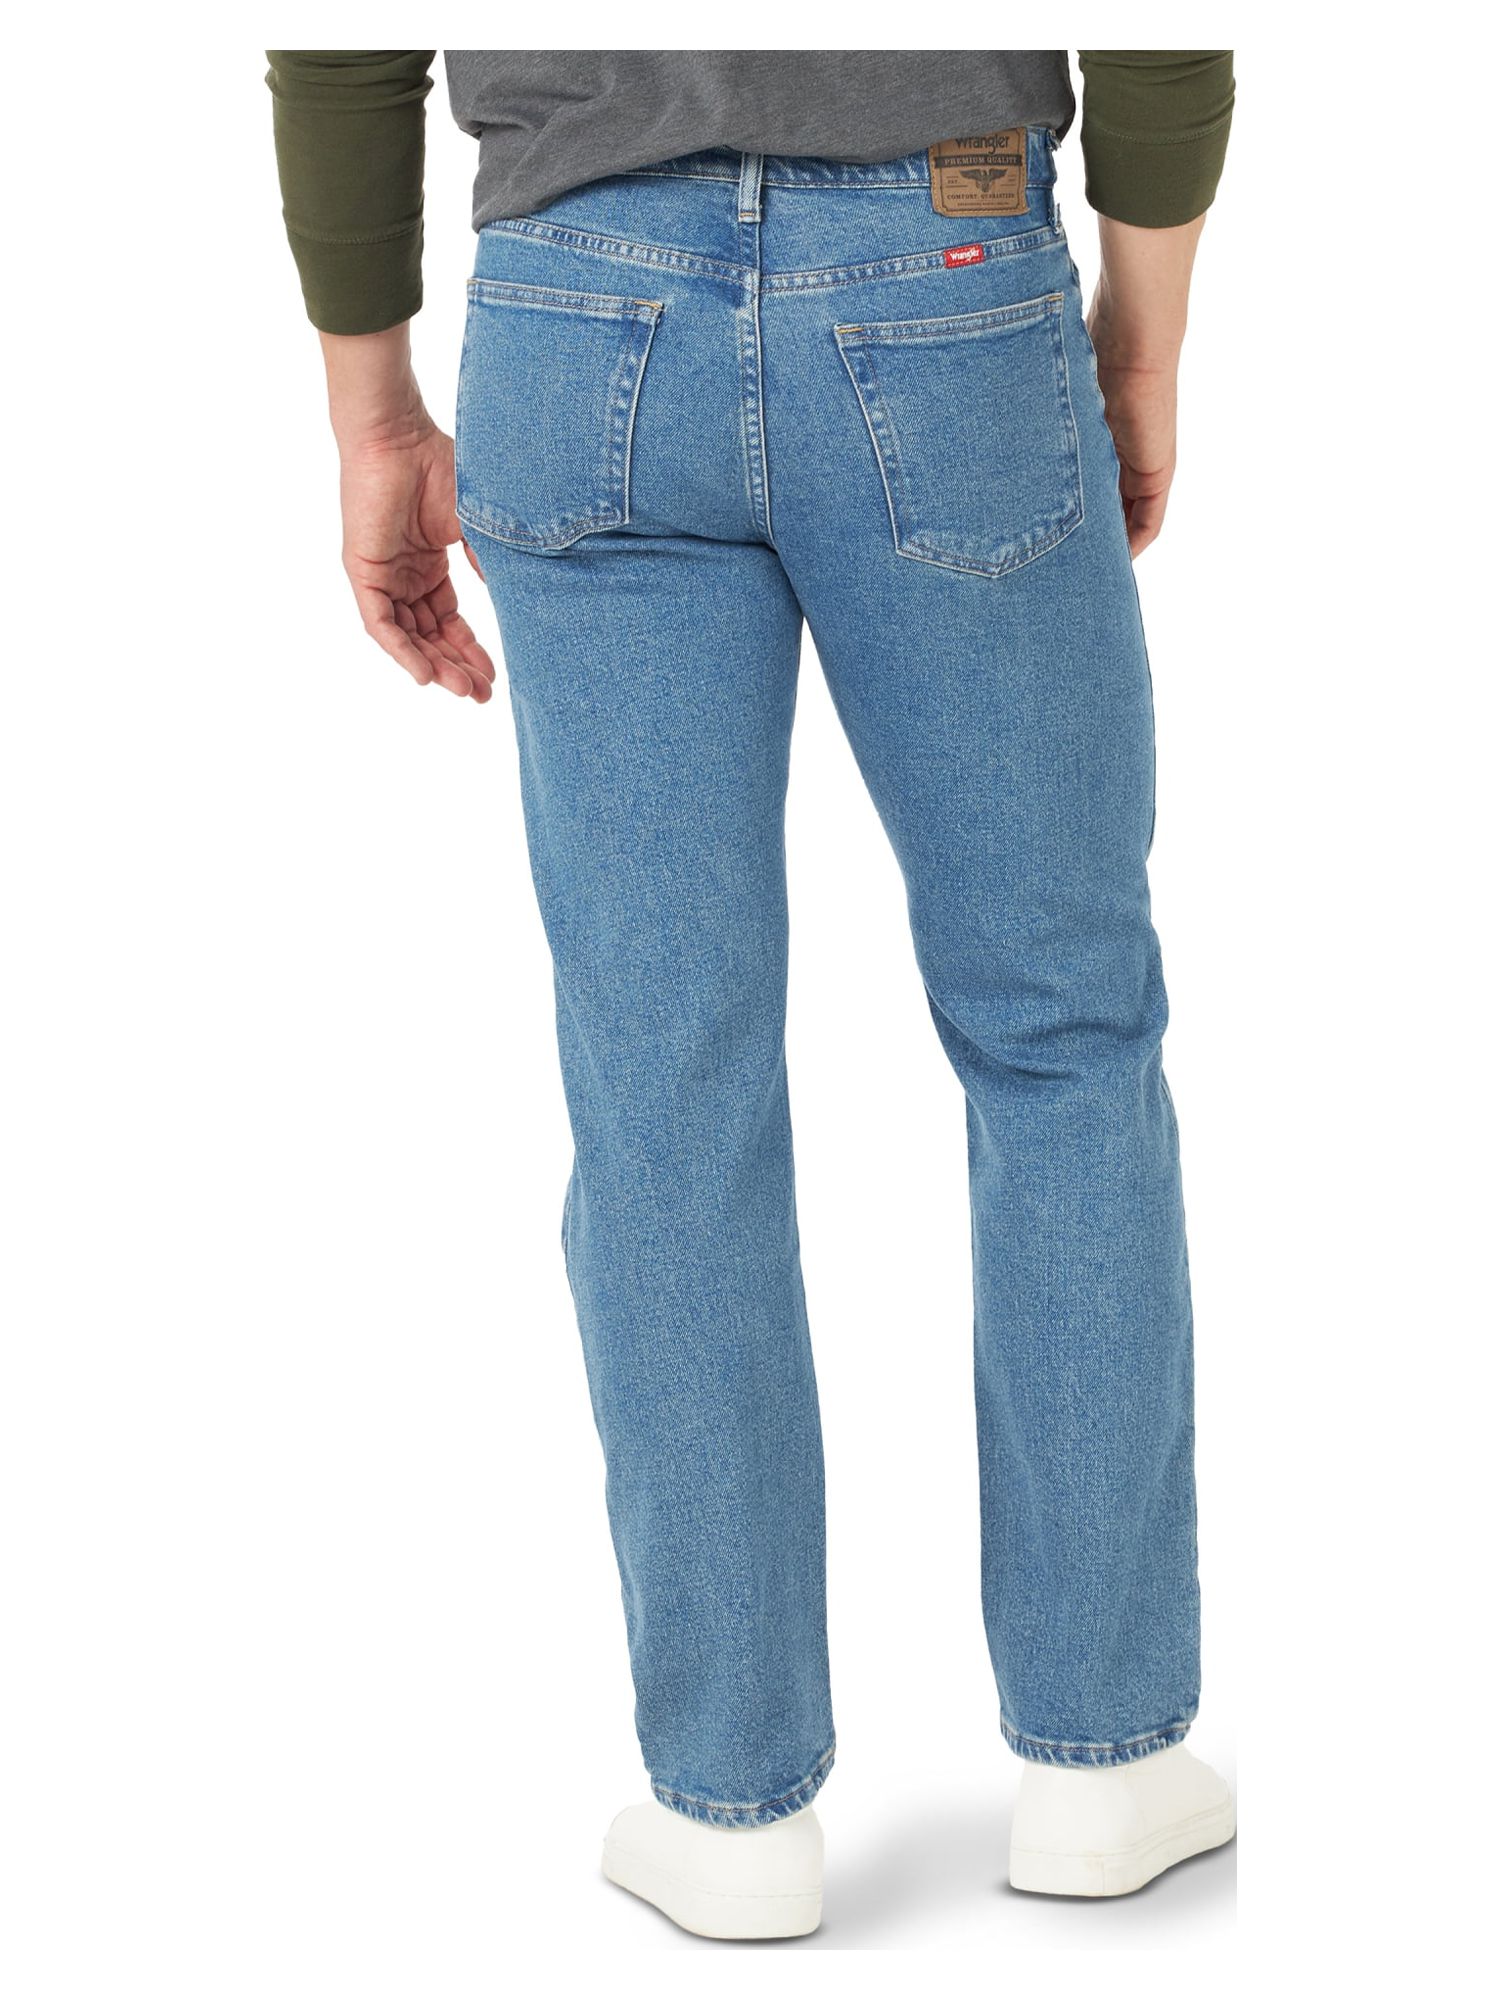 Wrangler Men's and Big Men's Relaxed Fit Jeans with Flex - image 4 of 7